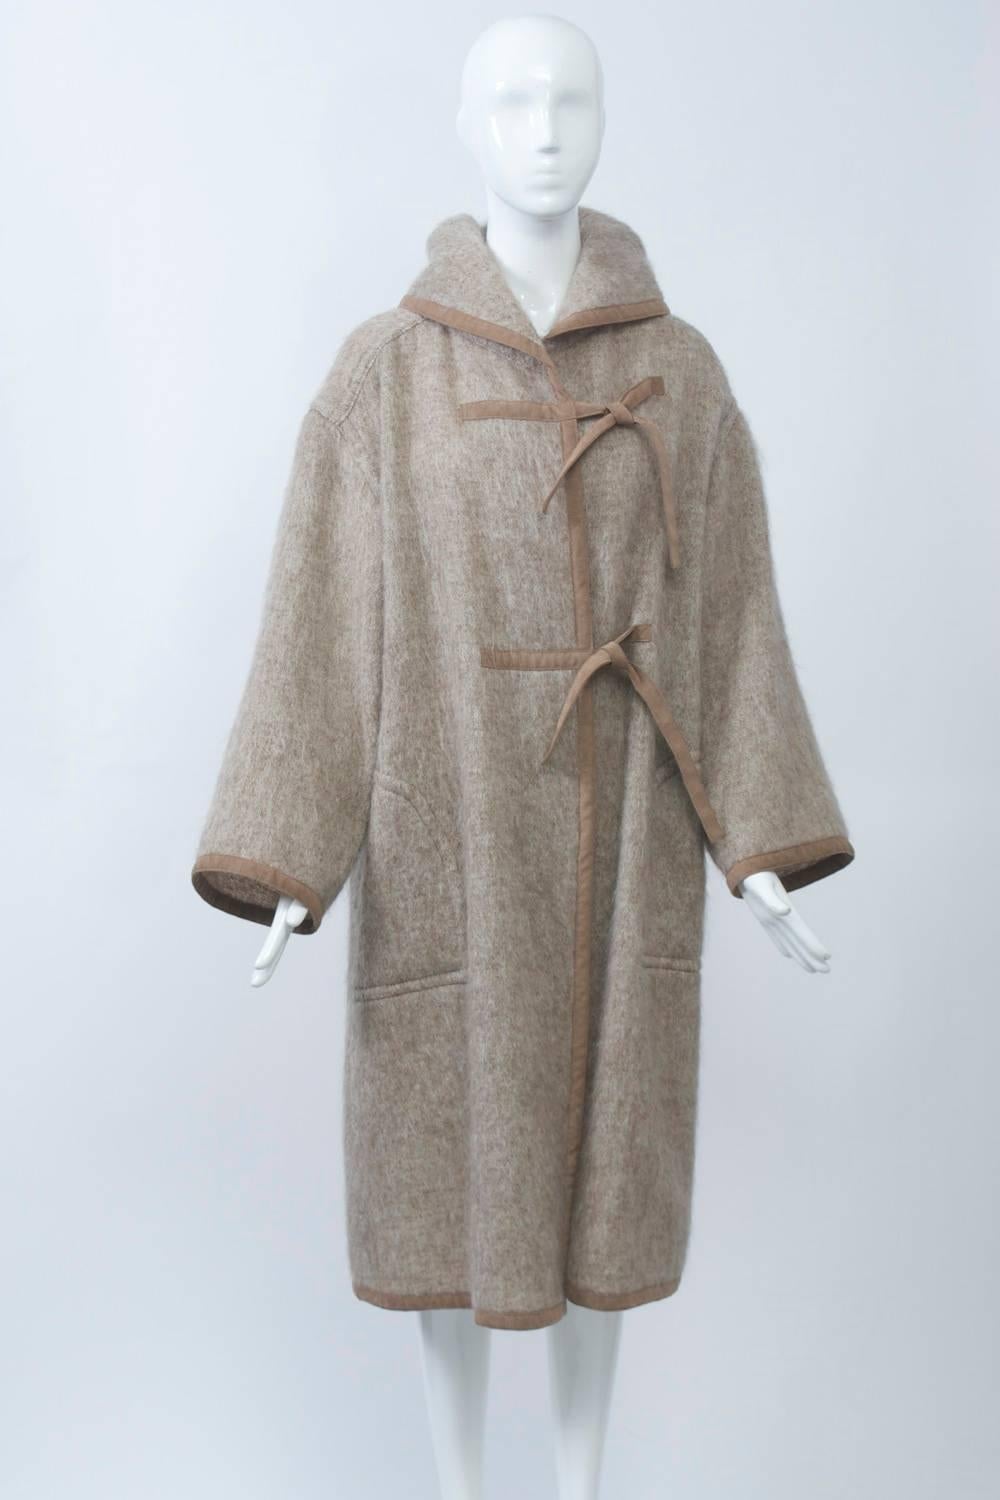 Heather tan mohair coat by Kasper for Joan Leslie featuring ultrasuede trim around edges and as two ties as closures. Dropped shoulder with wide sleeves and collar that converts to a hood. Unlined. Approximate size M.